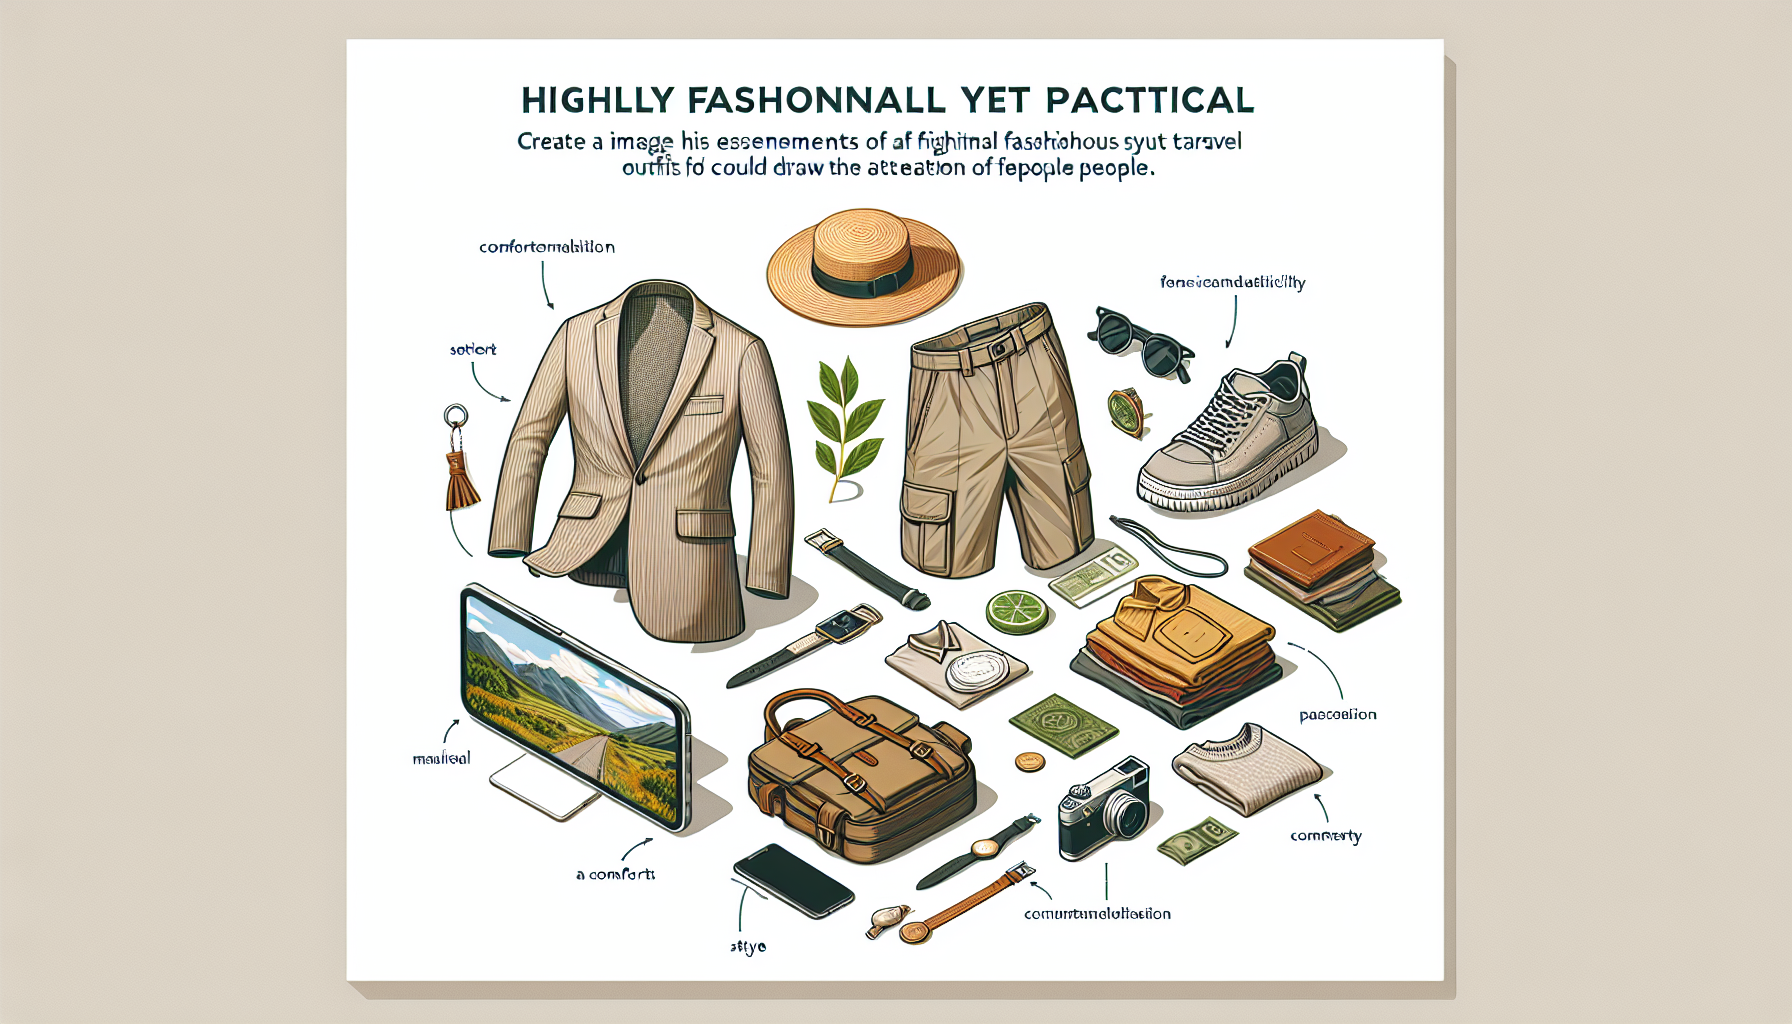 learn how to travel in style with these top fashionable and functional tips for a stylish and comfortable journey.